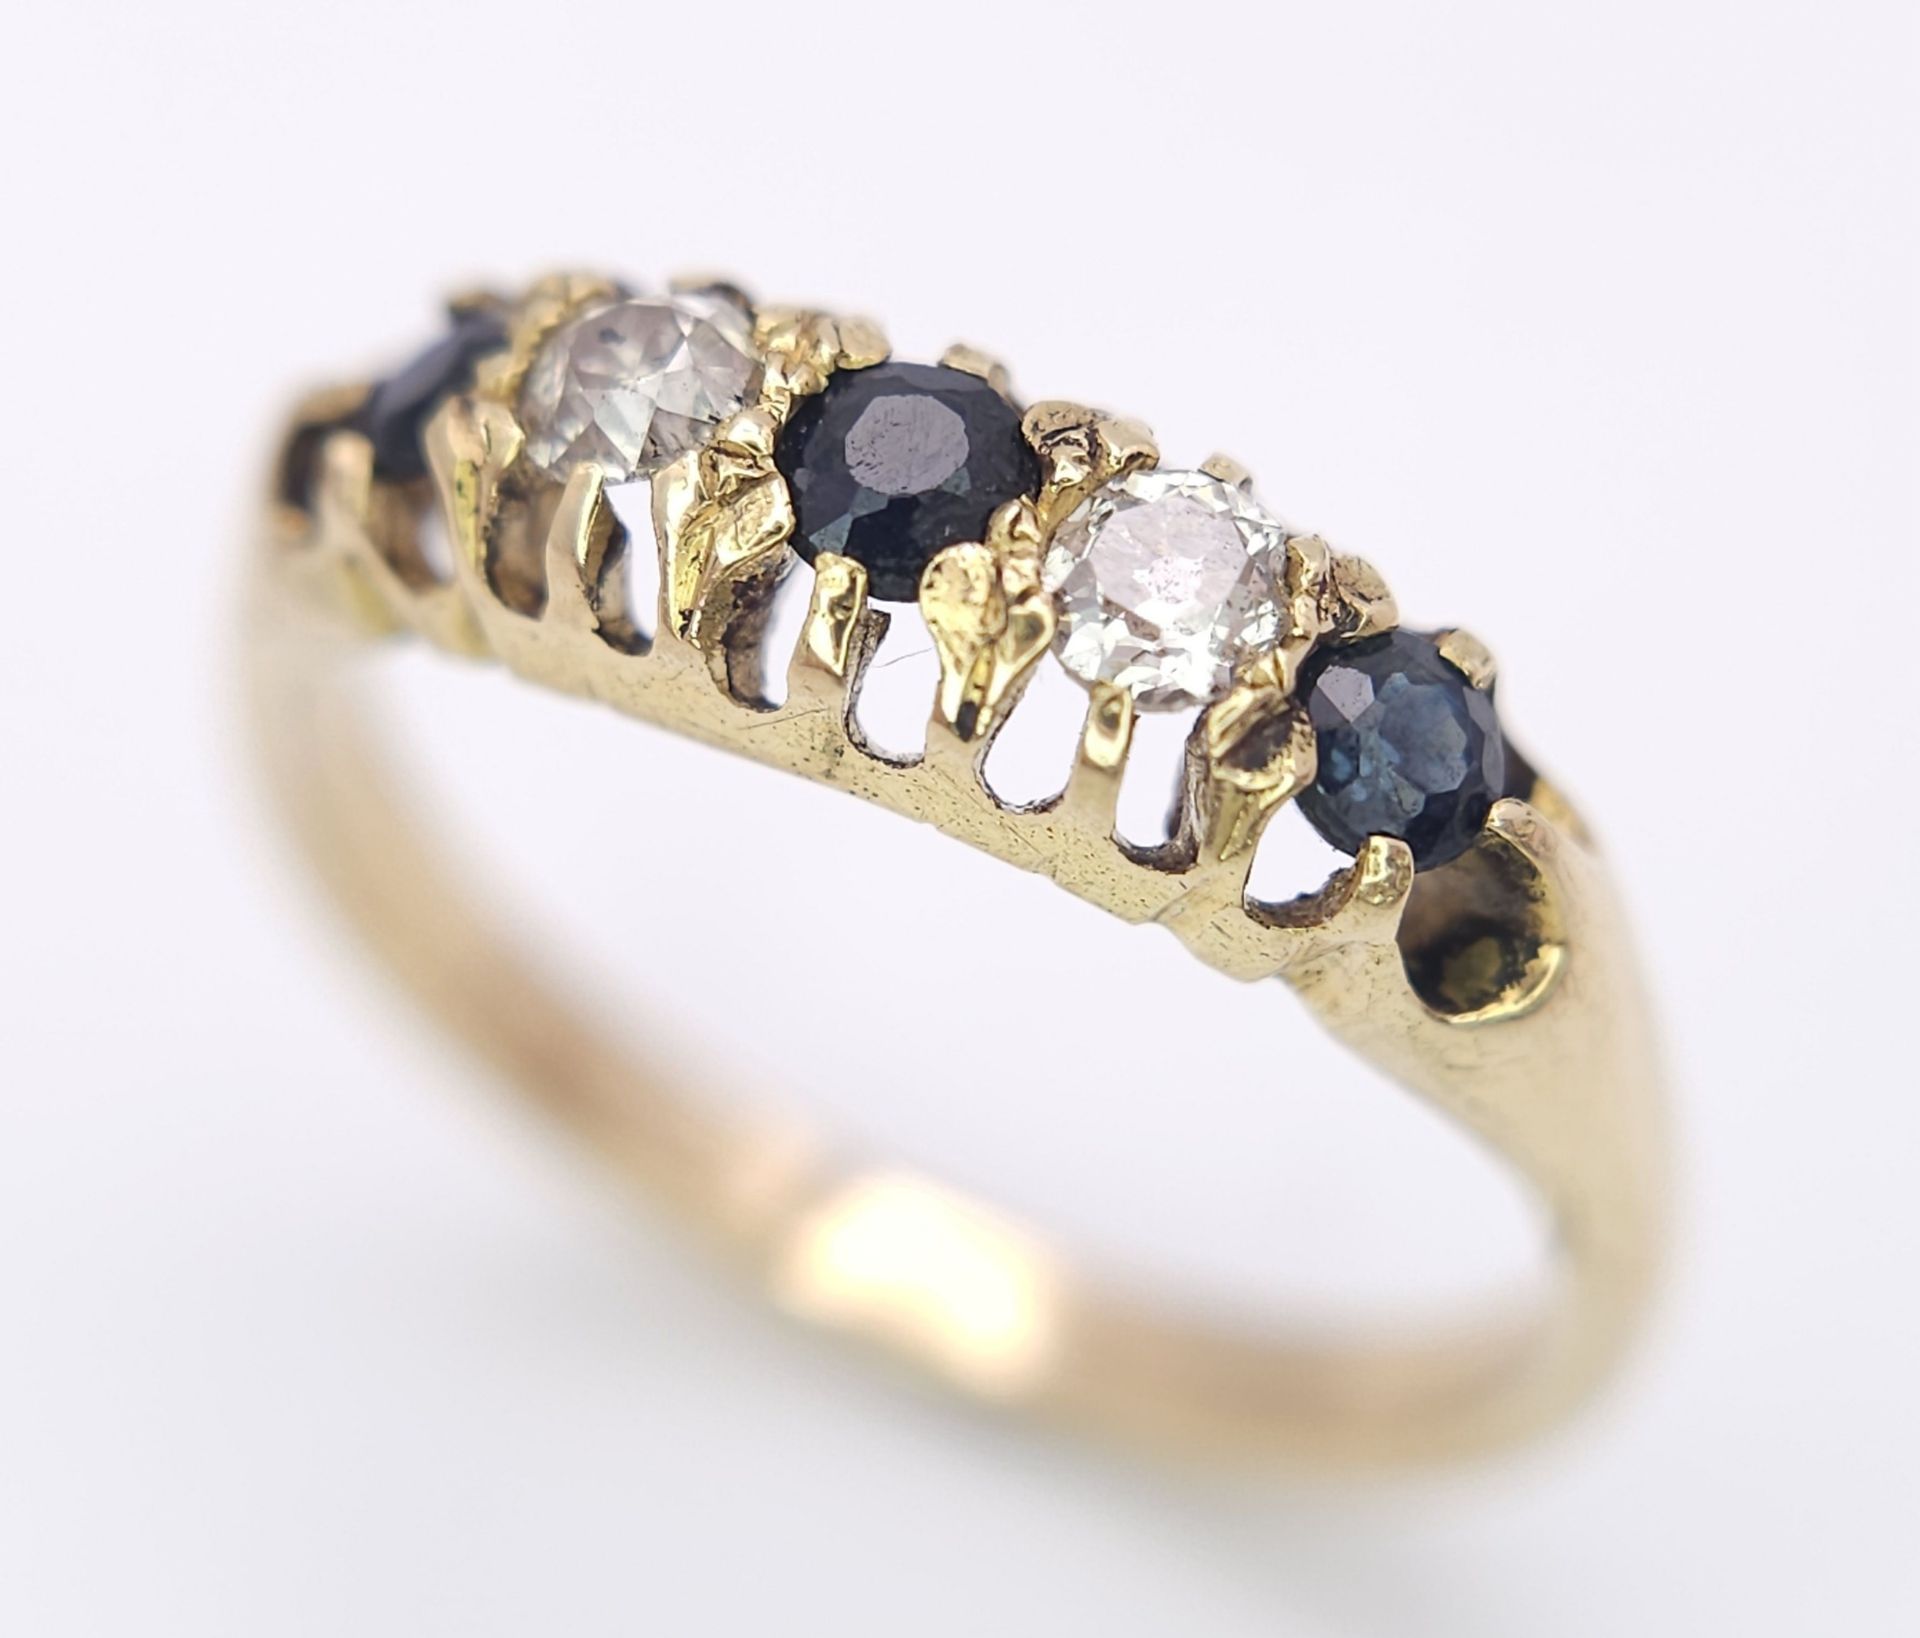 AN 18K YELLOW GOLD (TESTS AS) VINTAGE DIAMOND AND SAPPHIRE OLD CUT RING. 0.15CT OLD CUT DIAMONDS.